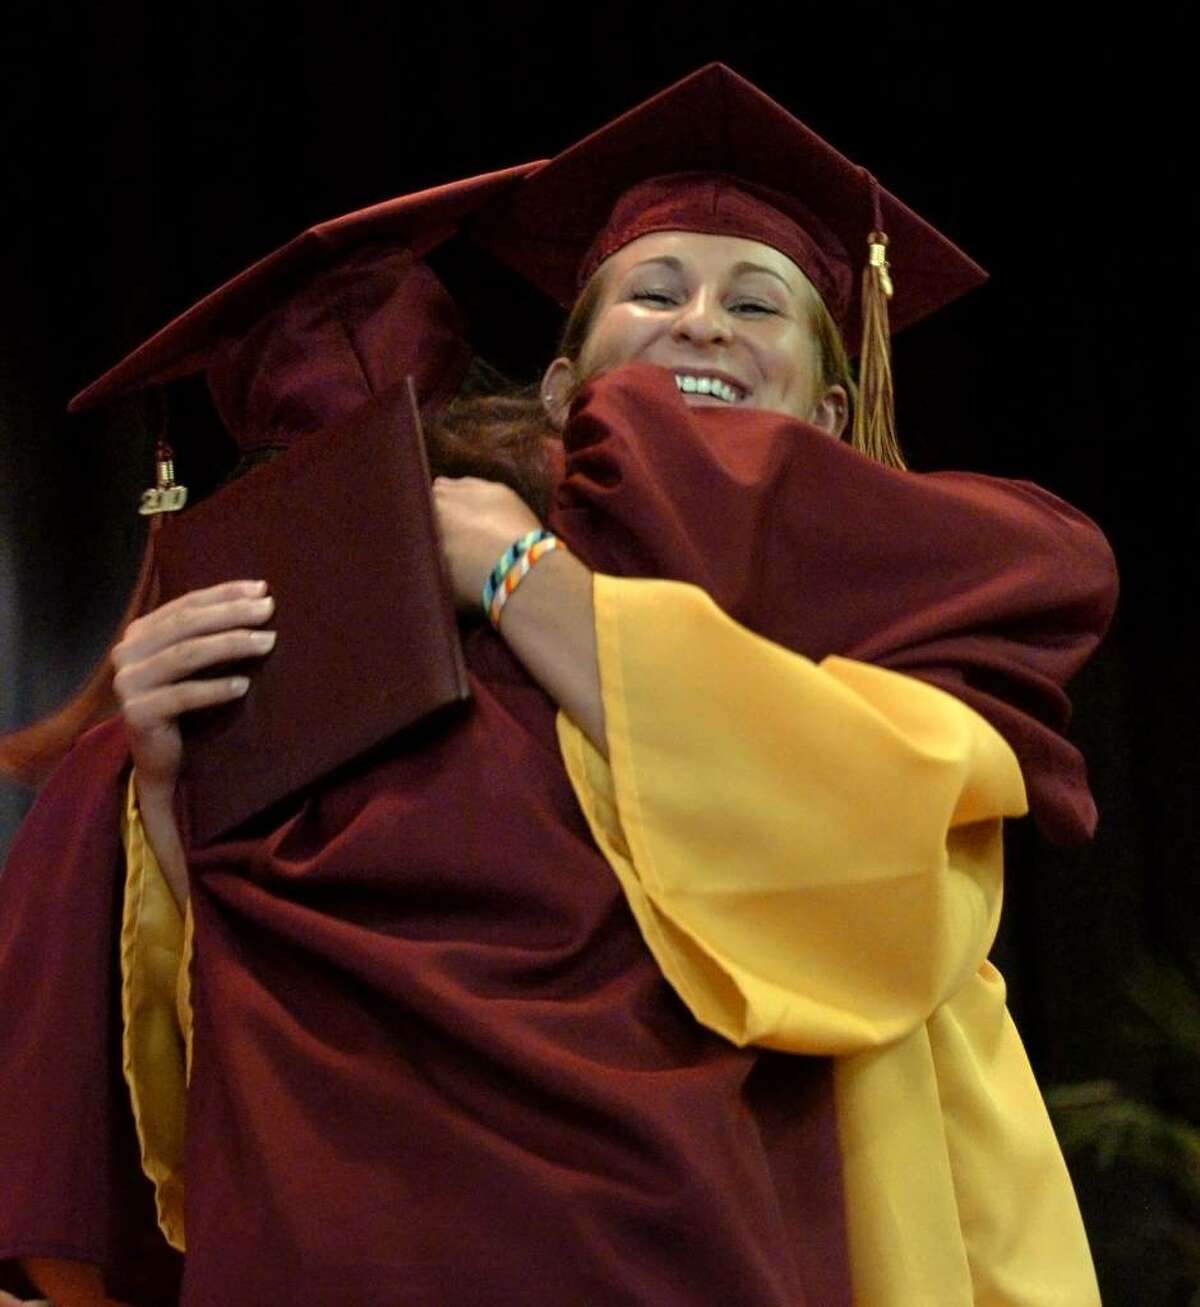 Graduates Monica Hirschbeck, facing camera, and Rachel Heyse hug each other after getting their diplomas, during St. Joseph's Class of 2010 Commencement Exercises in Trumbull, Conn. on Saturday June 05, 2010.